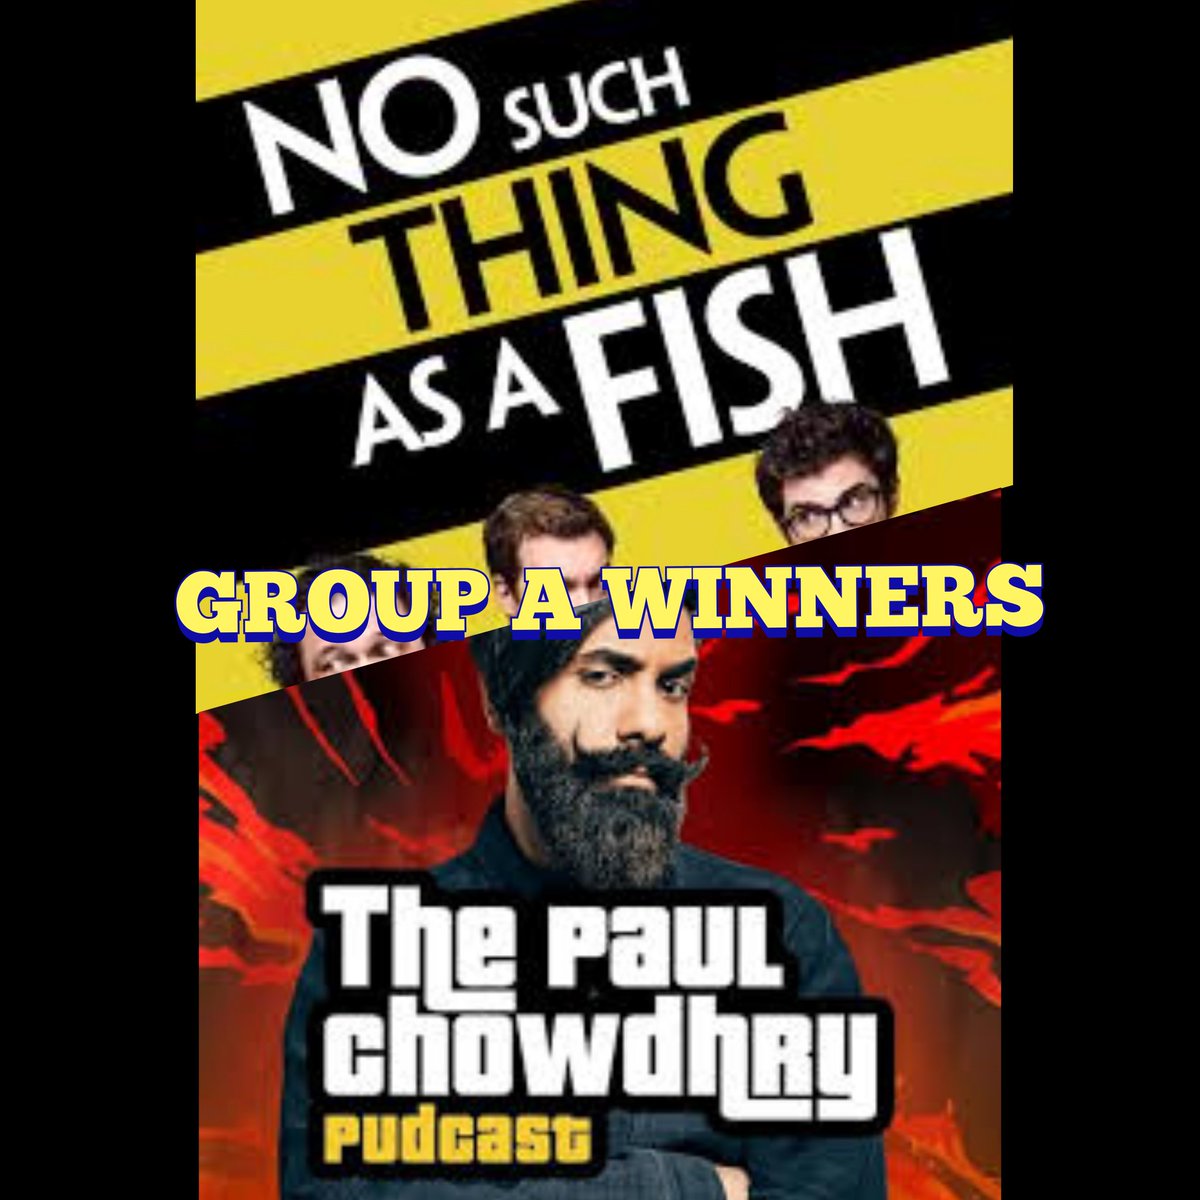 #ComedyPodcastWorldCup GROUP A  Congratulations to @nosuchthing & @paulchowdhry for getting to the next round. Thanks for voting.